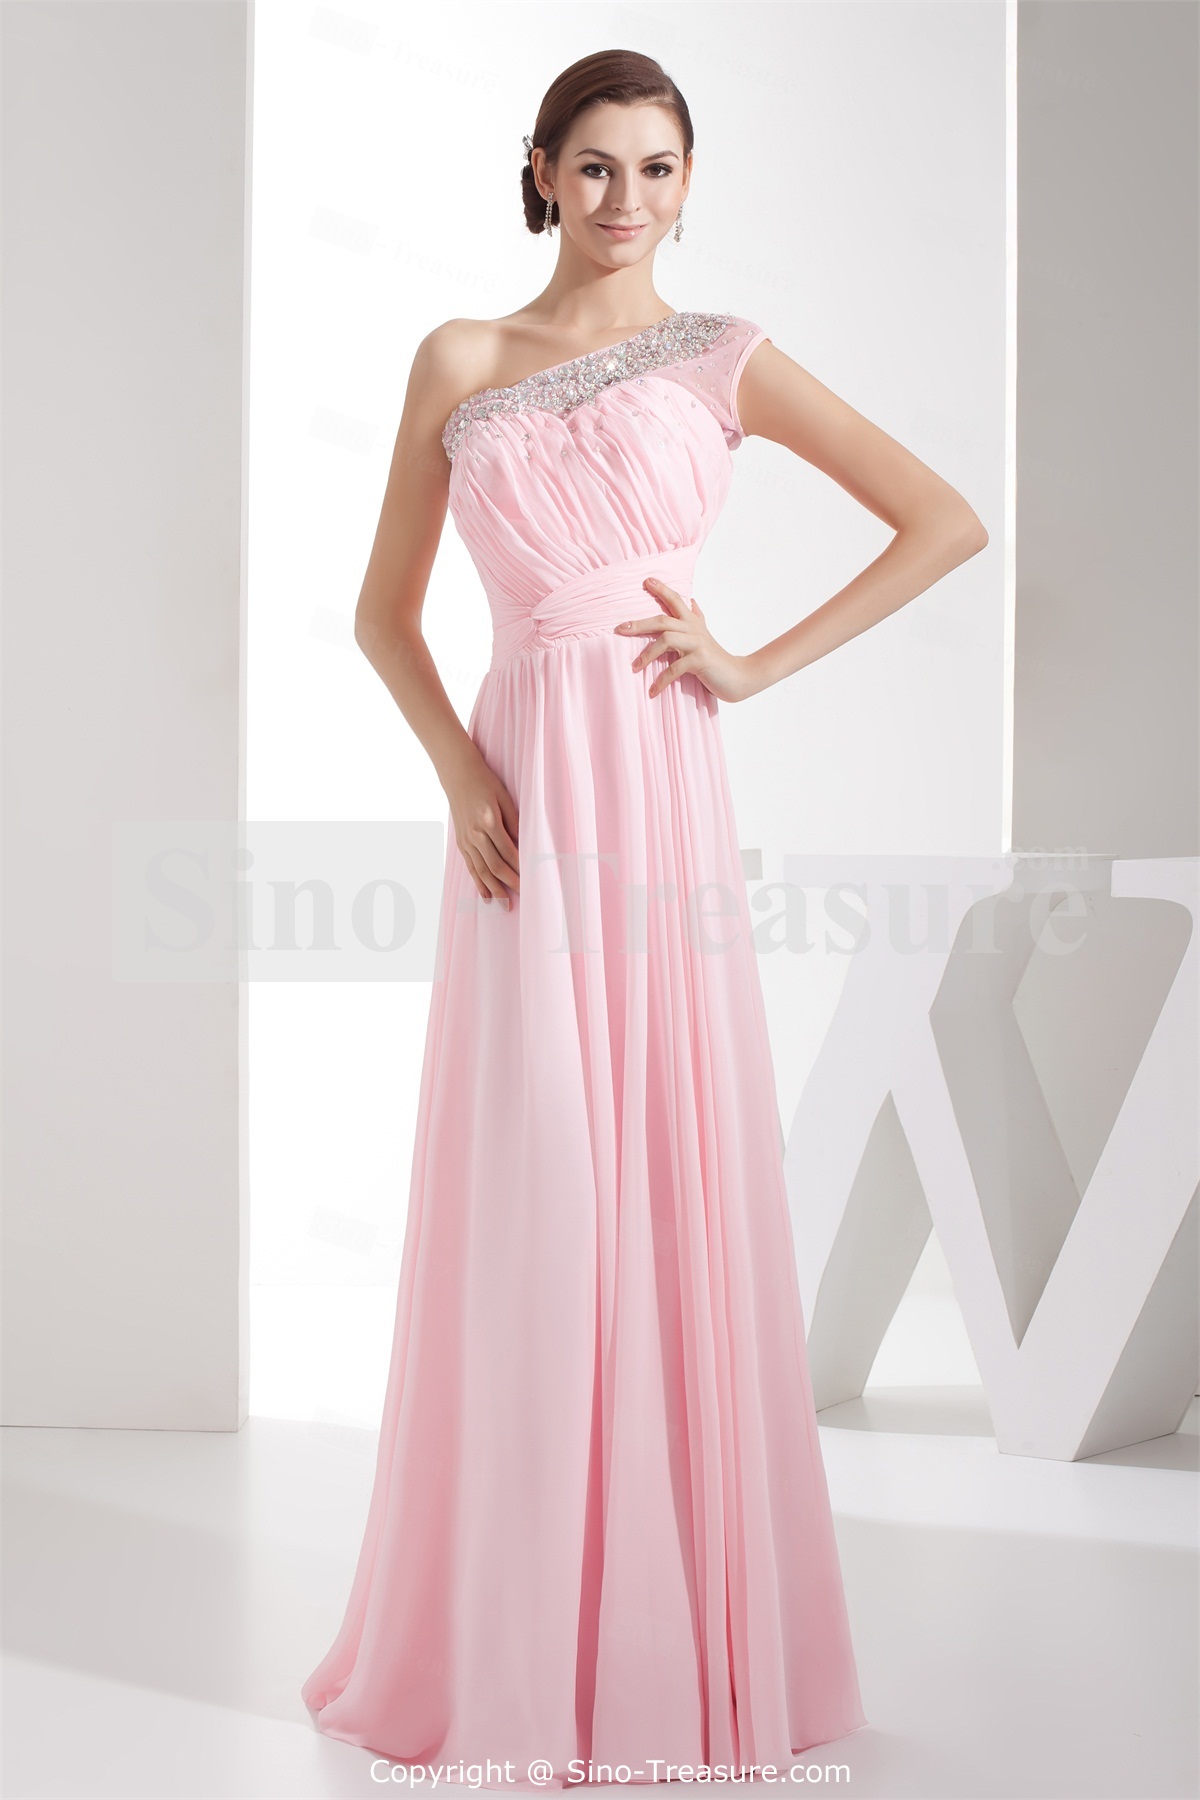 Light Pink Floor Length Dress - Different Occasions